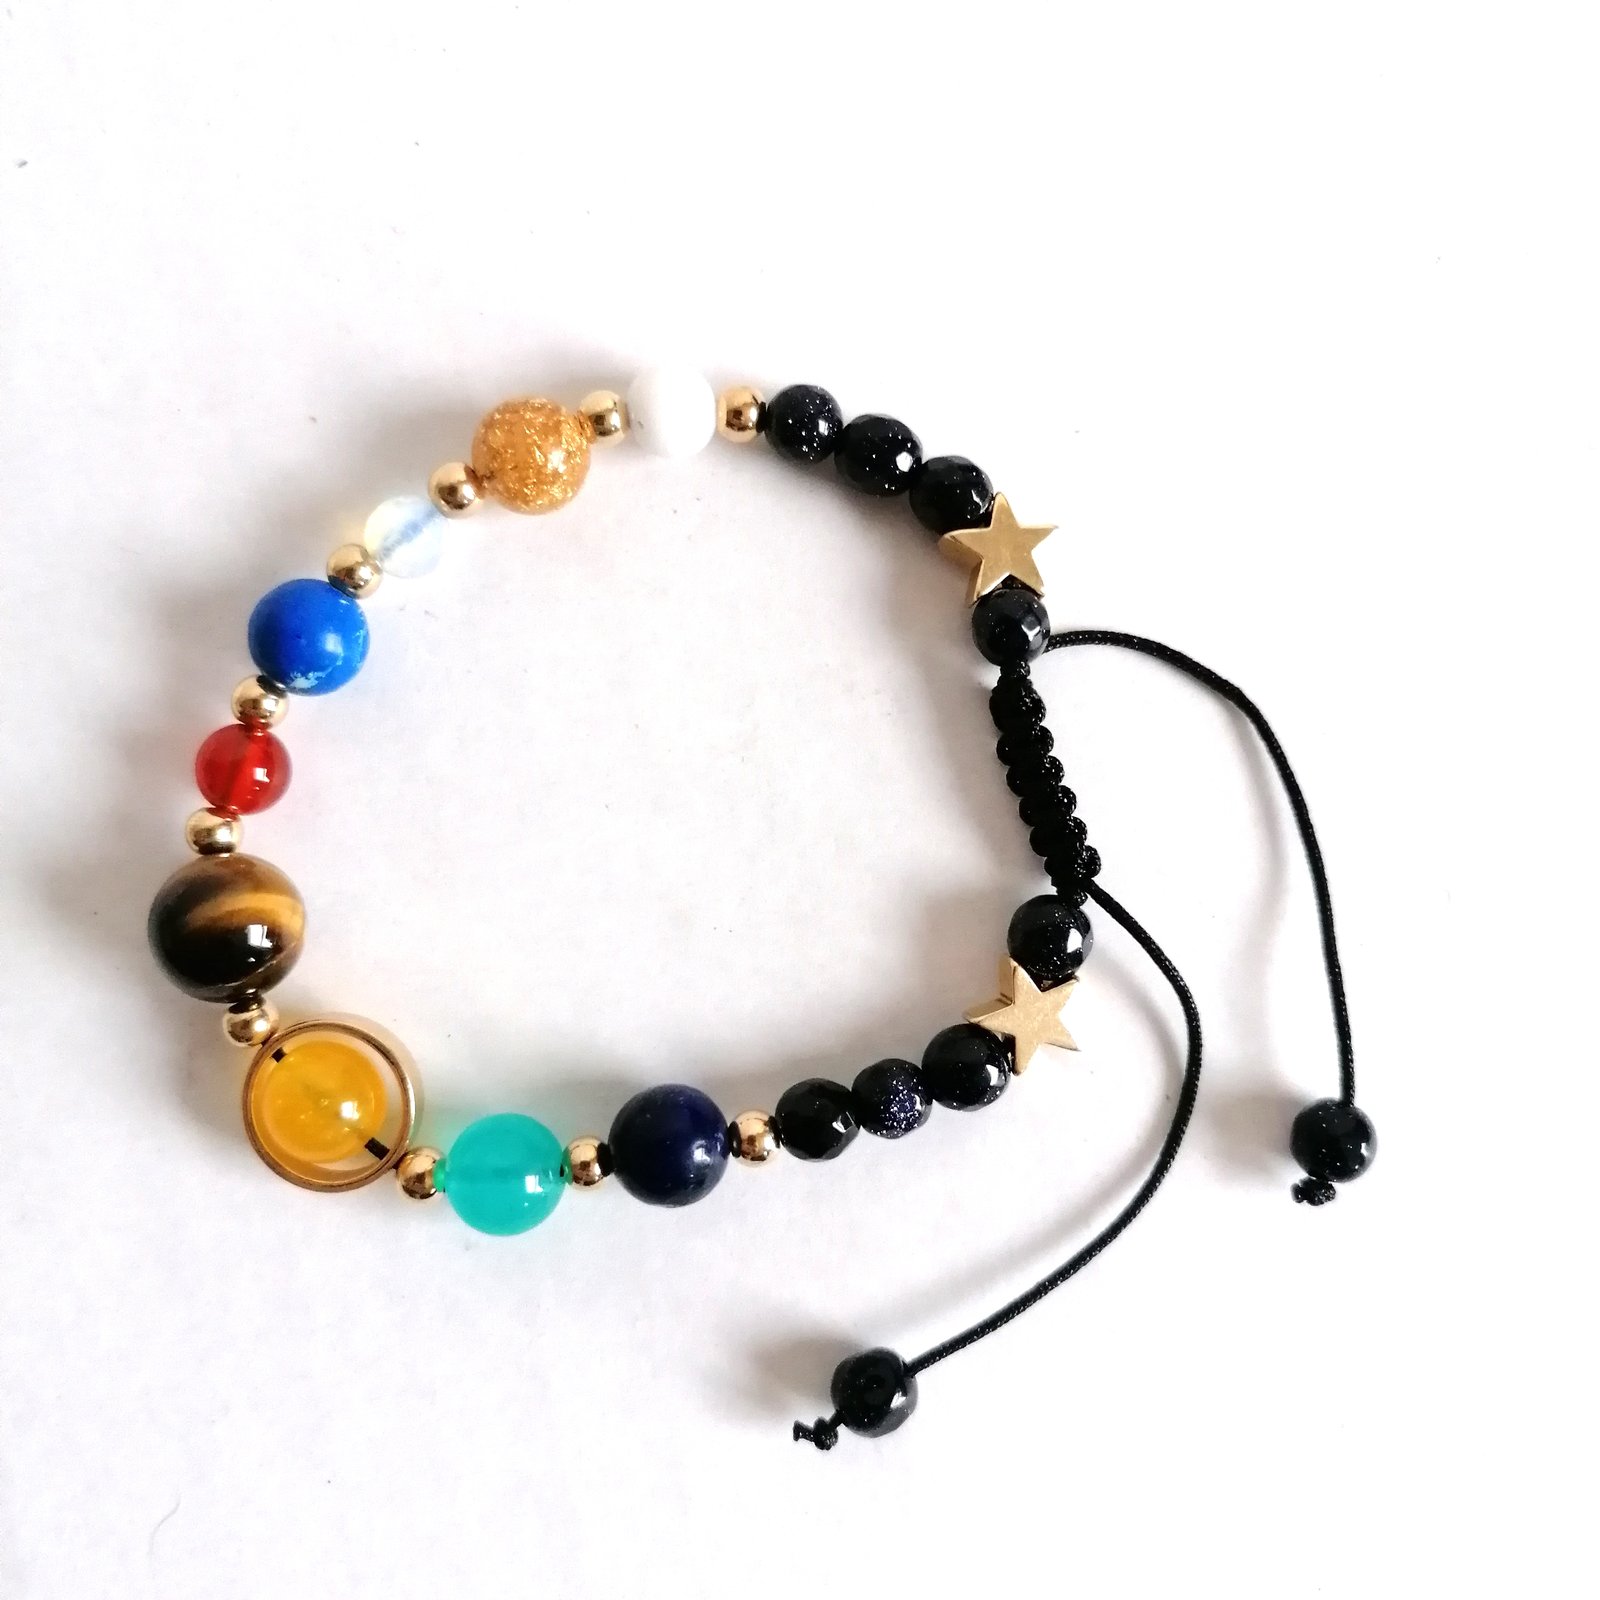 Buy Planets and Chakras Bracelets. Cosmic Energy. 8-10mm Size Natural  Stones. Handmade. Free Shipping Online in India - Etsy